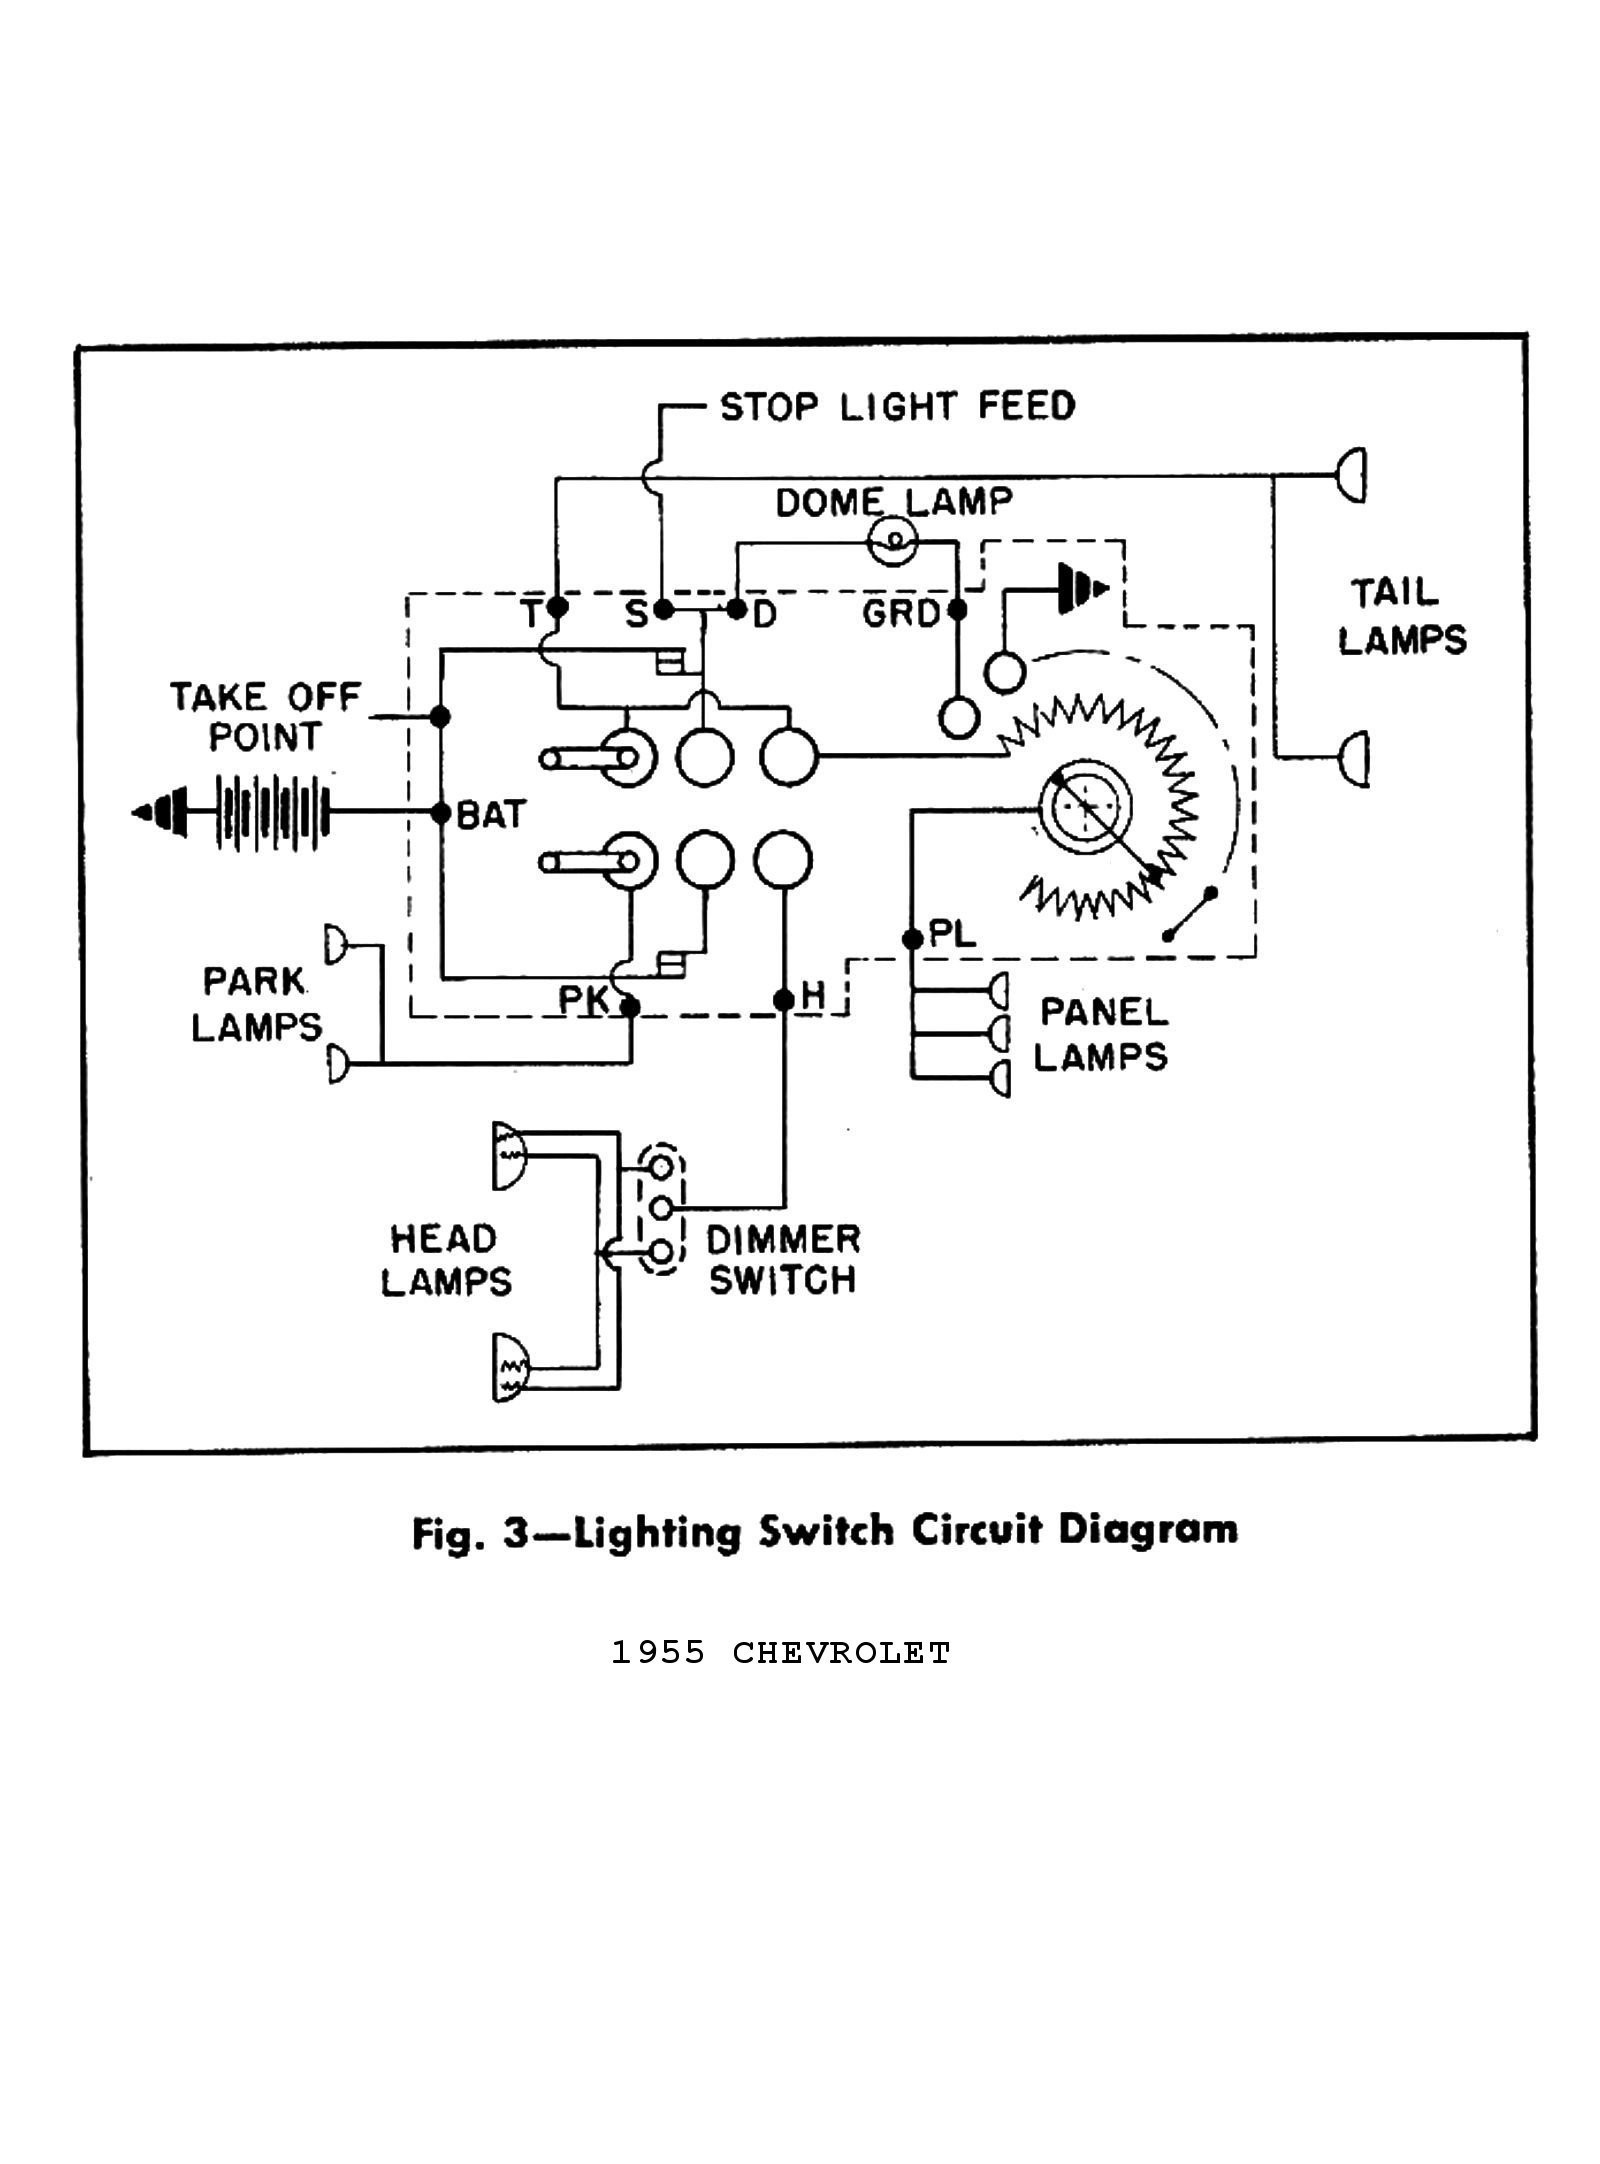 Ford Tractor Ignition Switch Wiring Diagram from mainetreasurechest.com